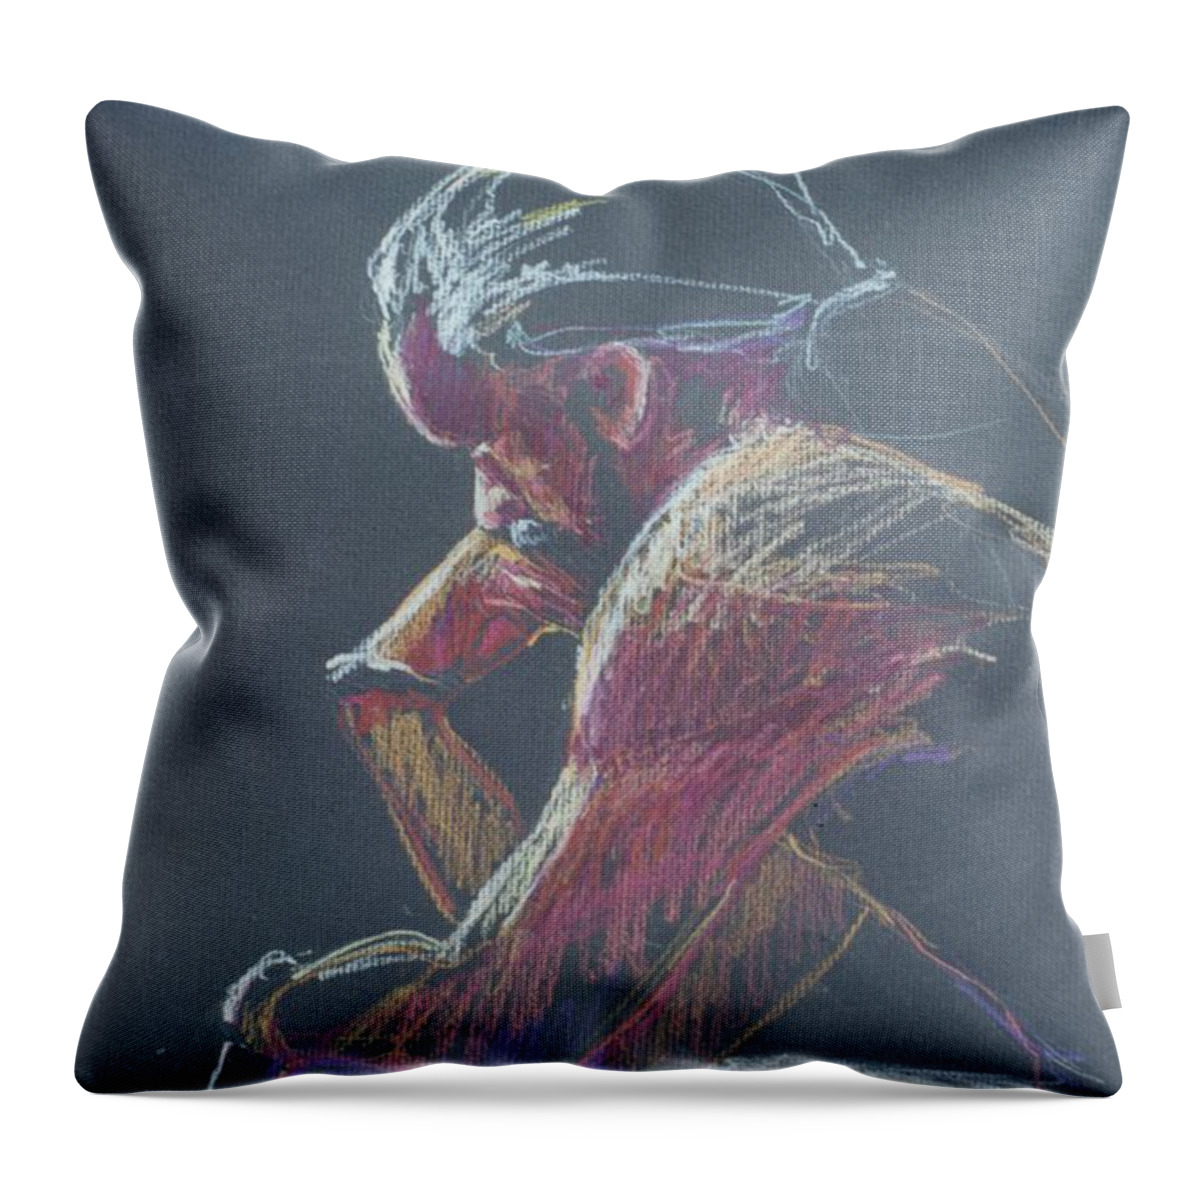  Throw Pillow featuring the painting Colored Pencil Sketch by Barbara Pease